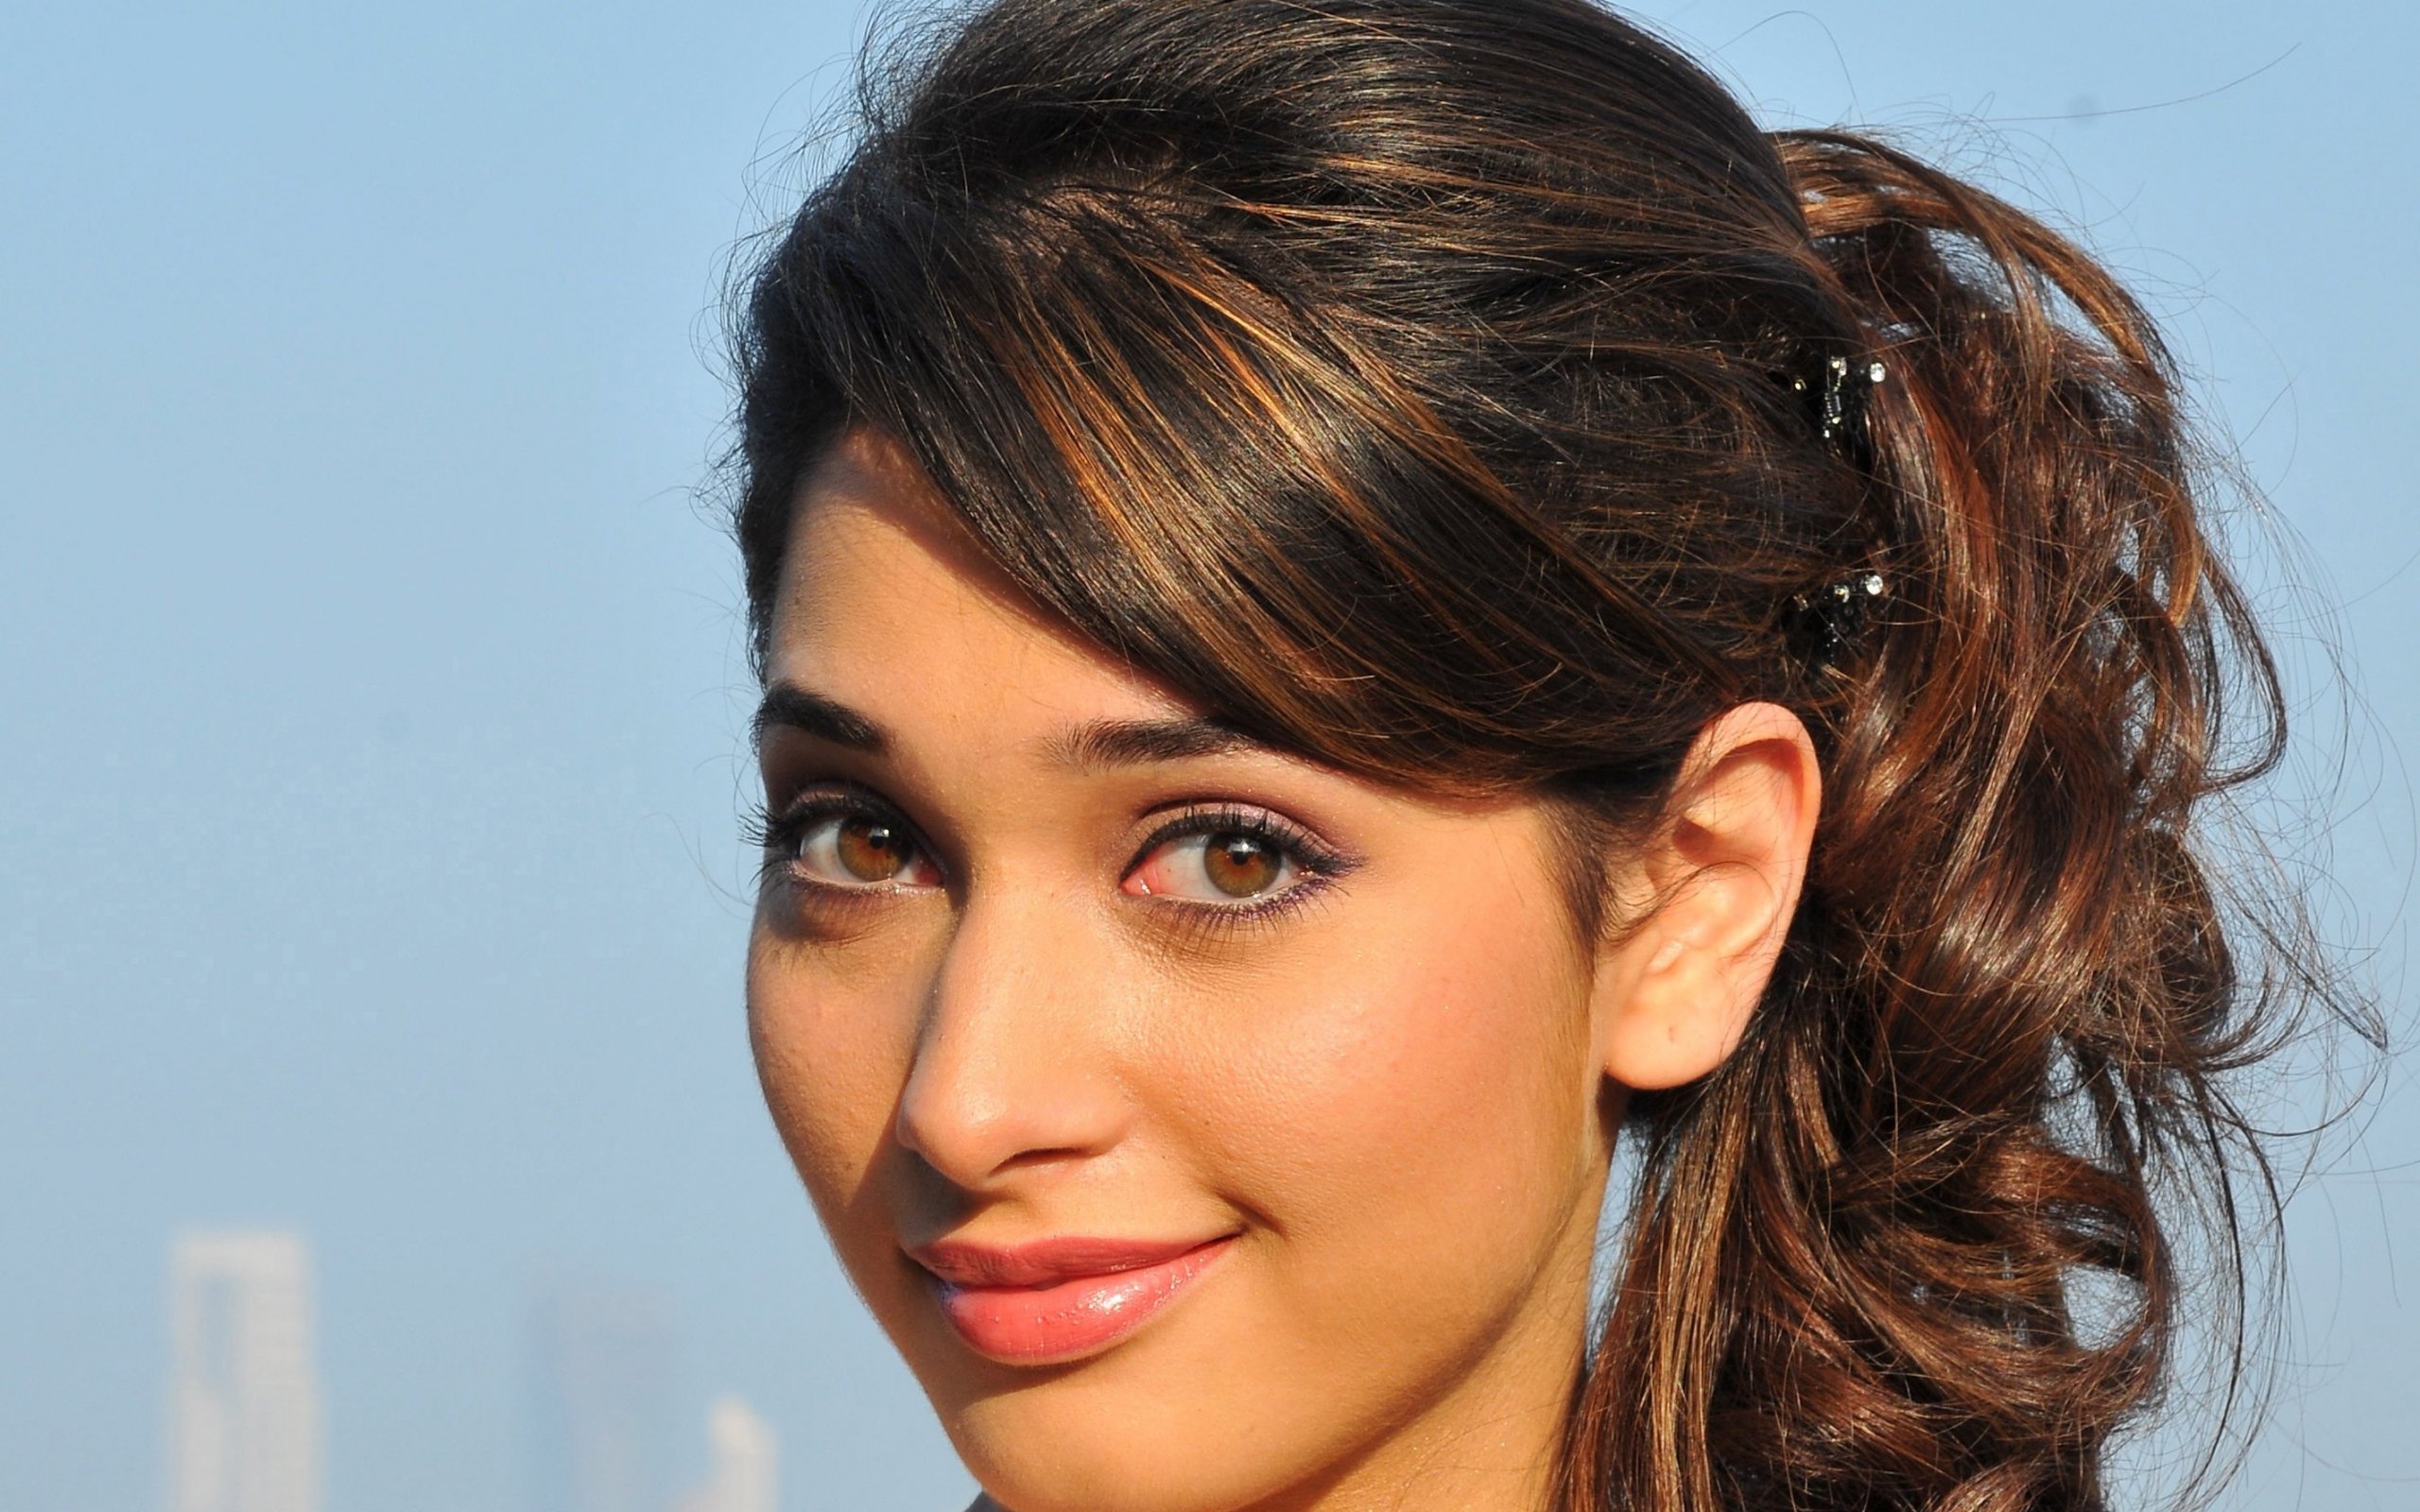 40+ Tamannaah Bhatia HD Wallpapers and Backgrounds